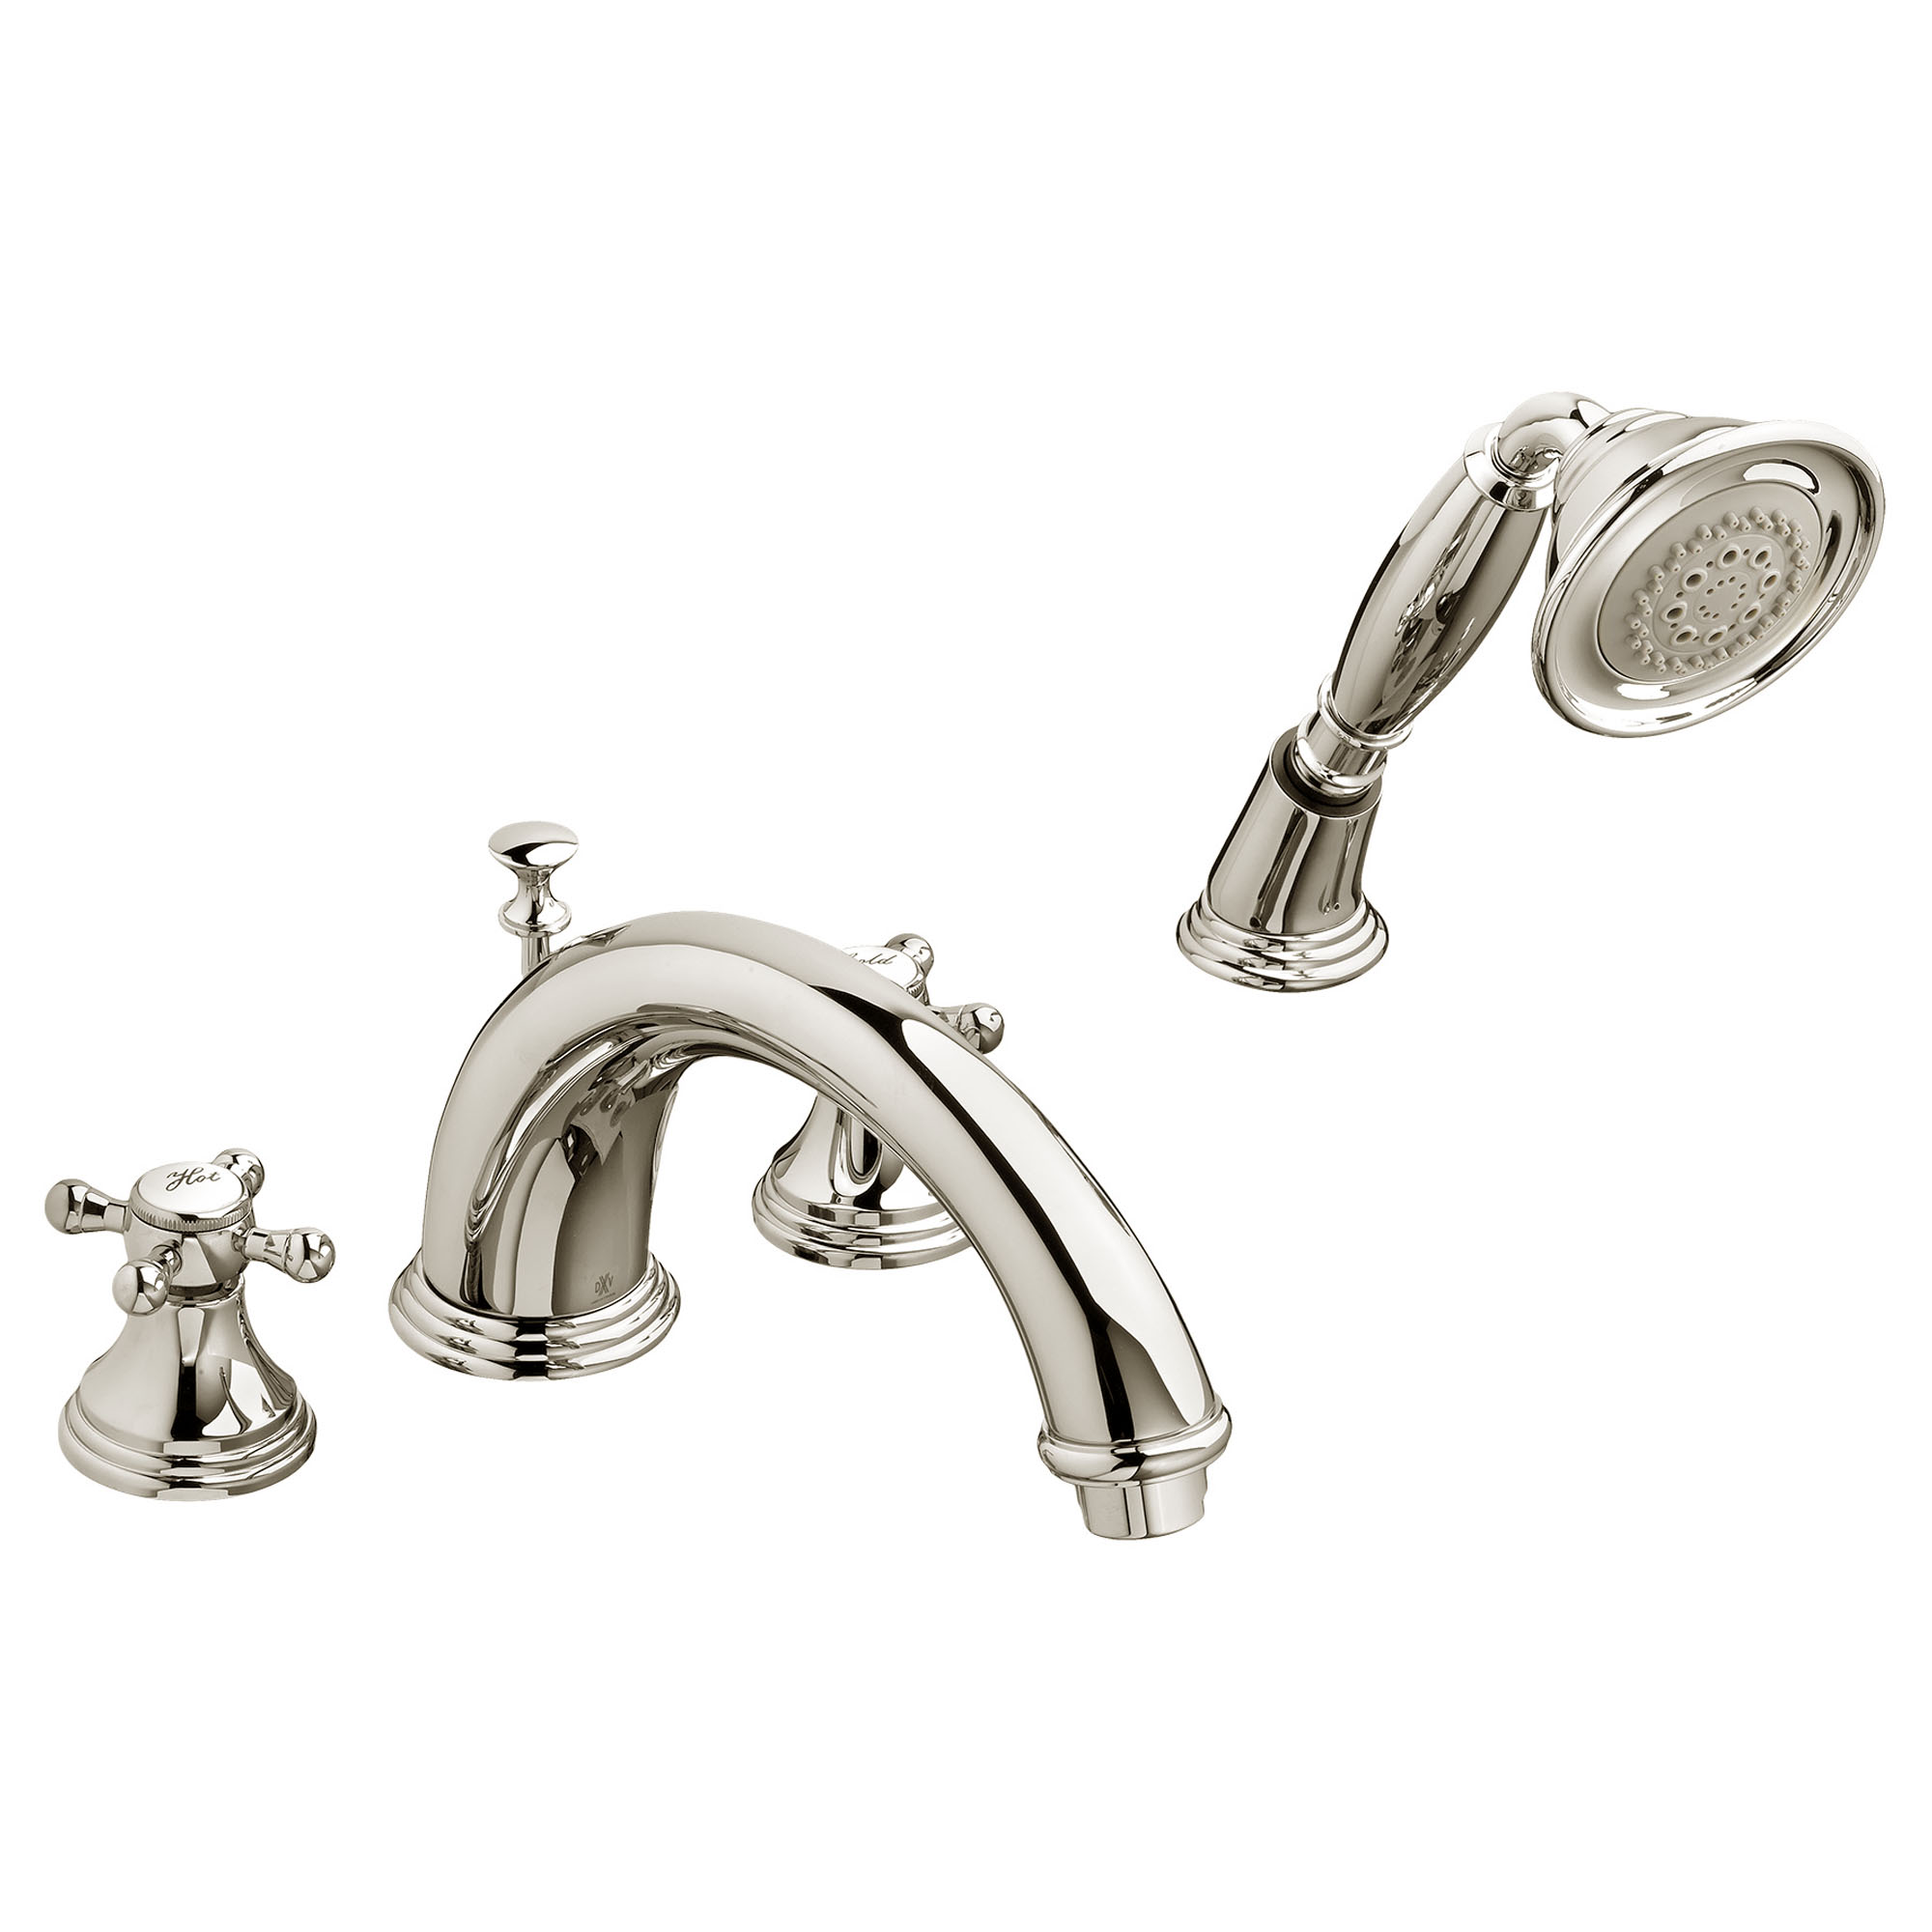 Ashbee 2-Handle Deck Mount Bathtub Faucet with Hand Shower and Cross Handles